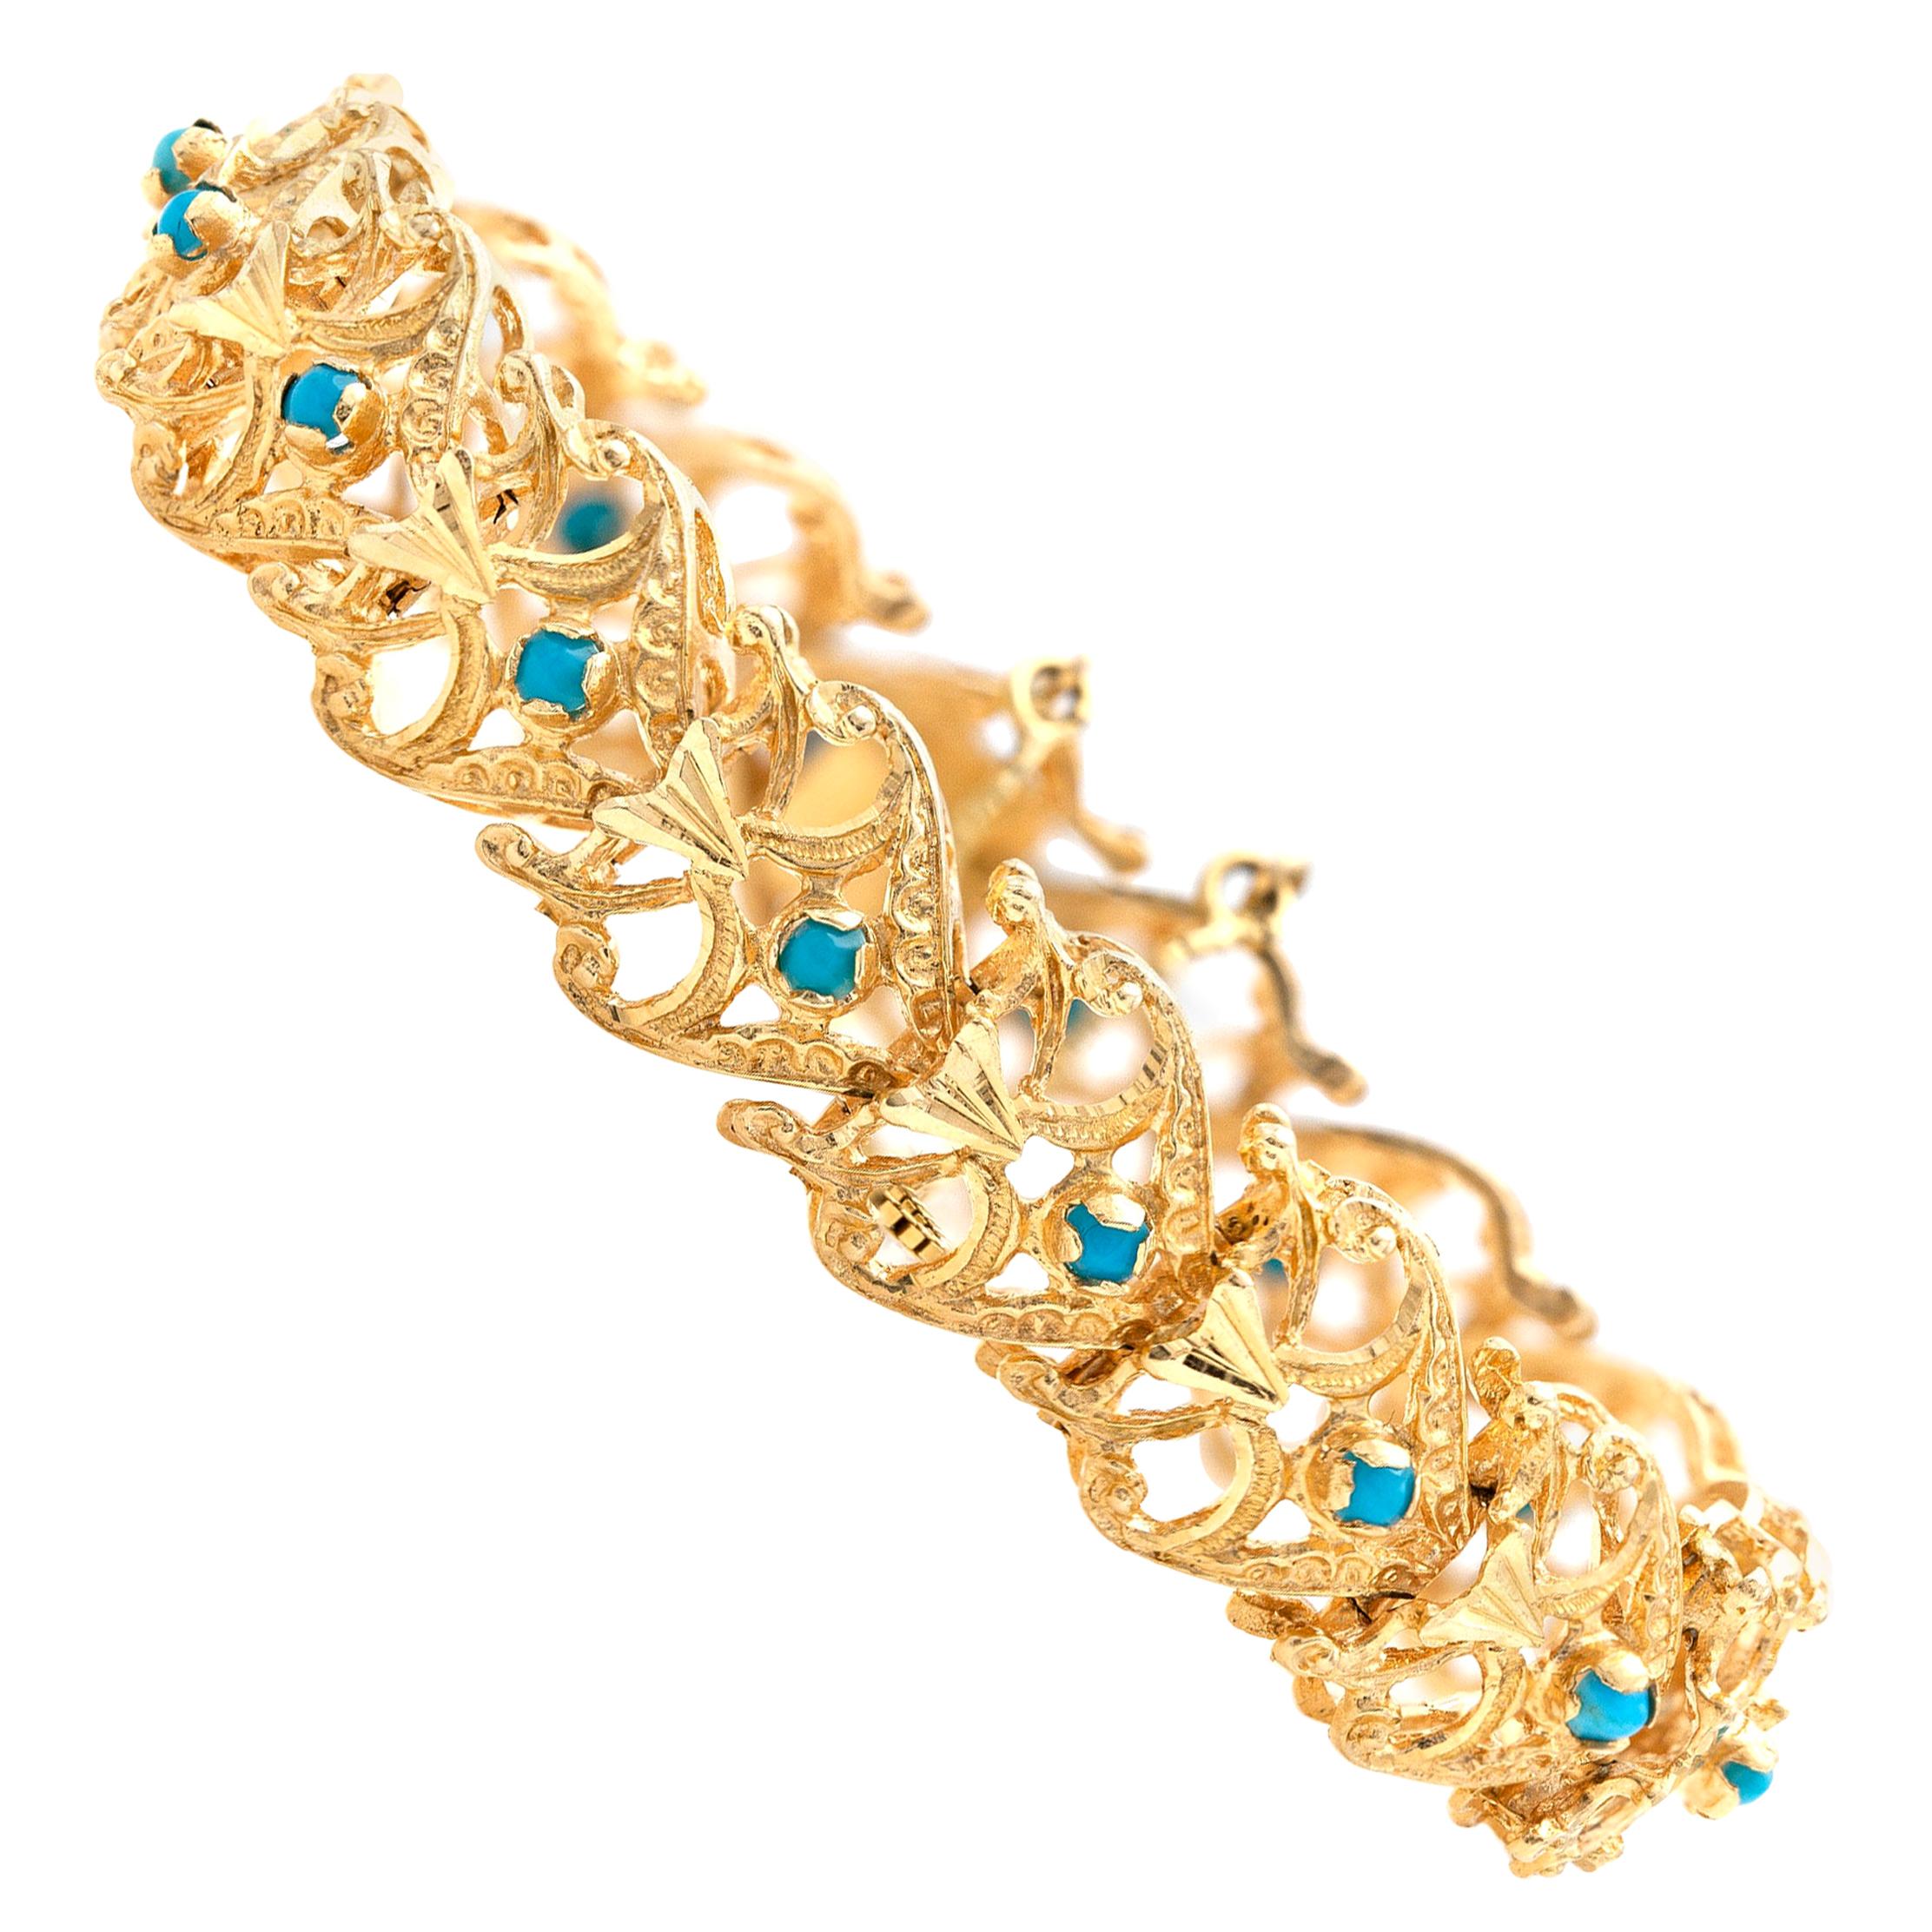 Gold Bracelet with Turquoise Beads For Sale